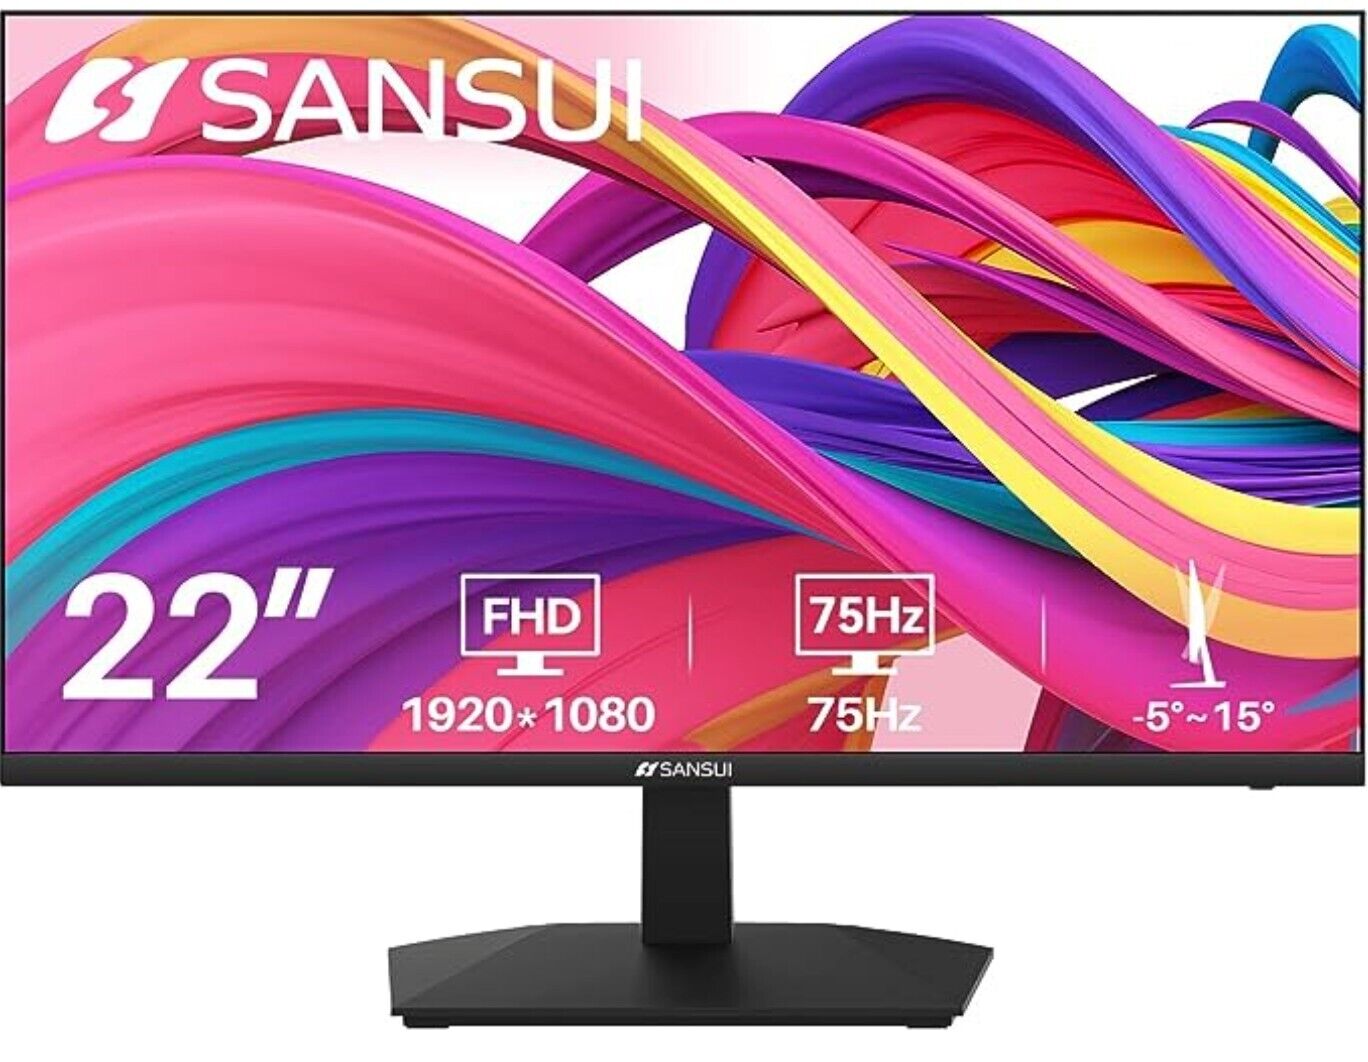 Sansui monitors 22 inch 1080P  FHD HDMI/VGA tilt Eye Care for working and gaming